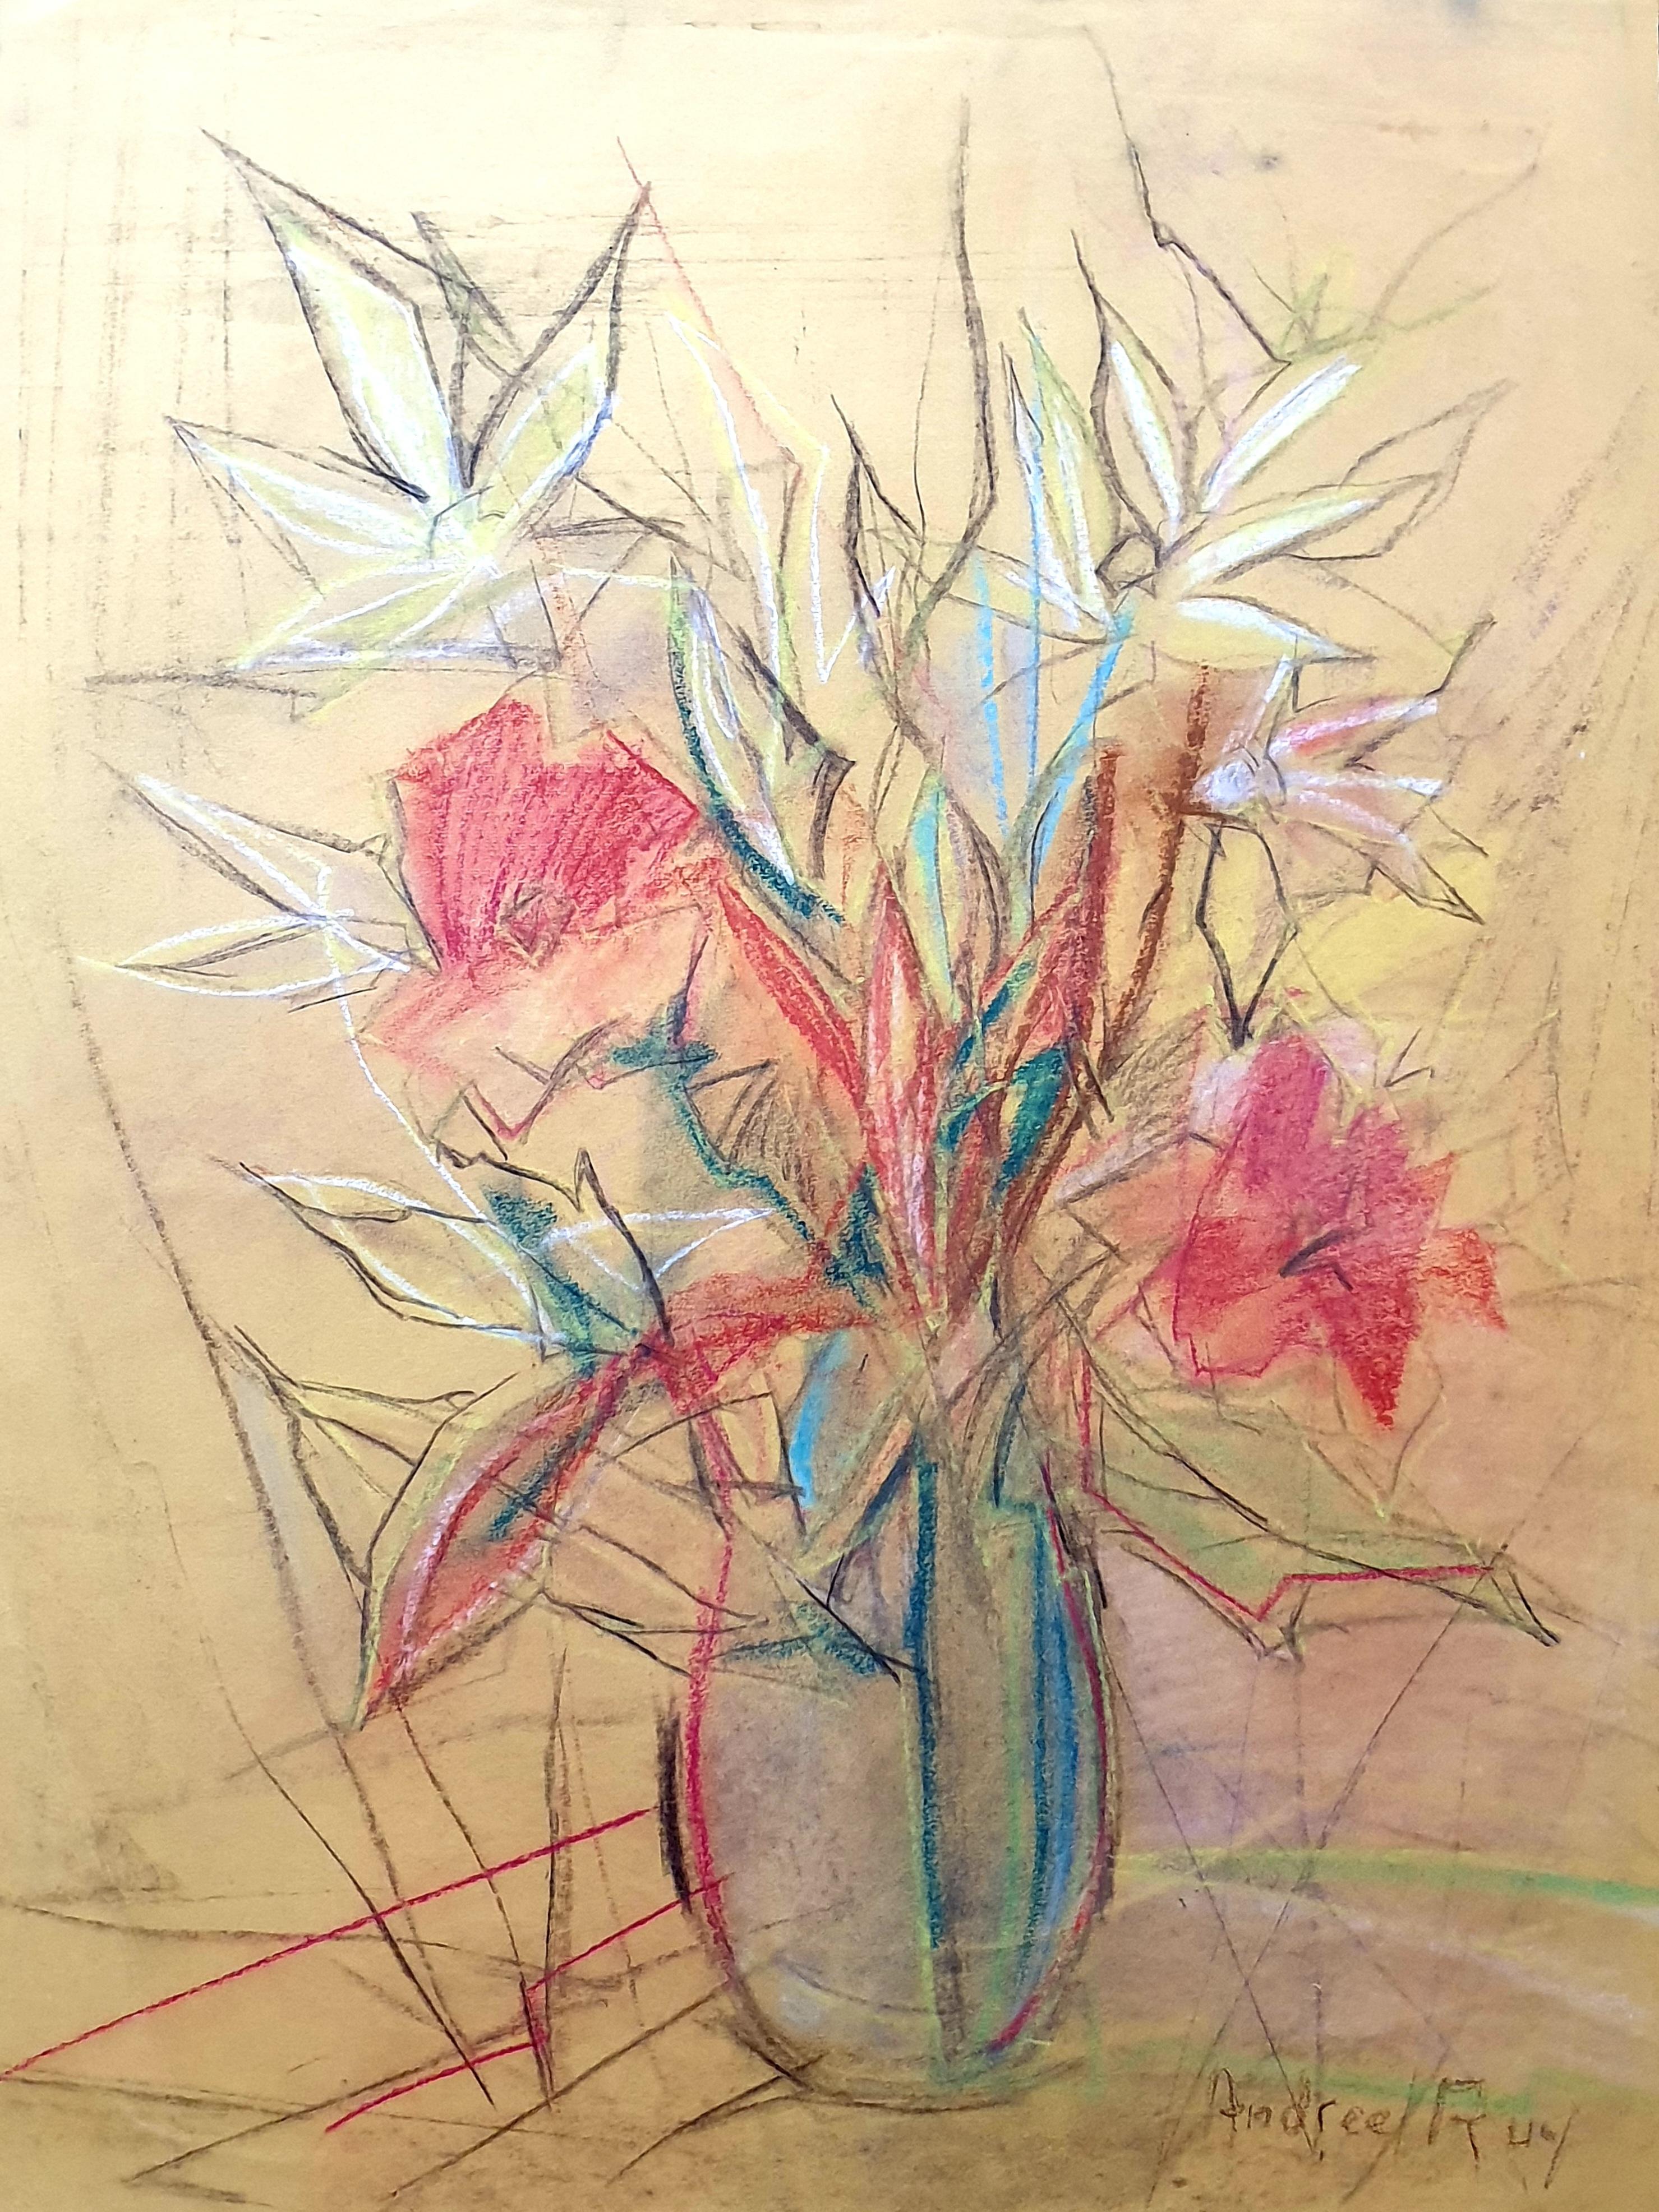 Expressionist Mid-Century Still Life of Flowers in a Vase.